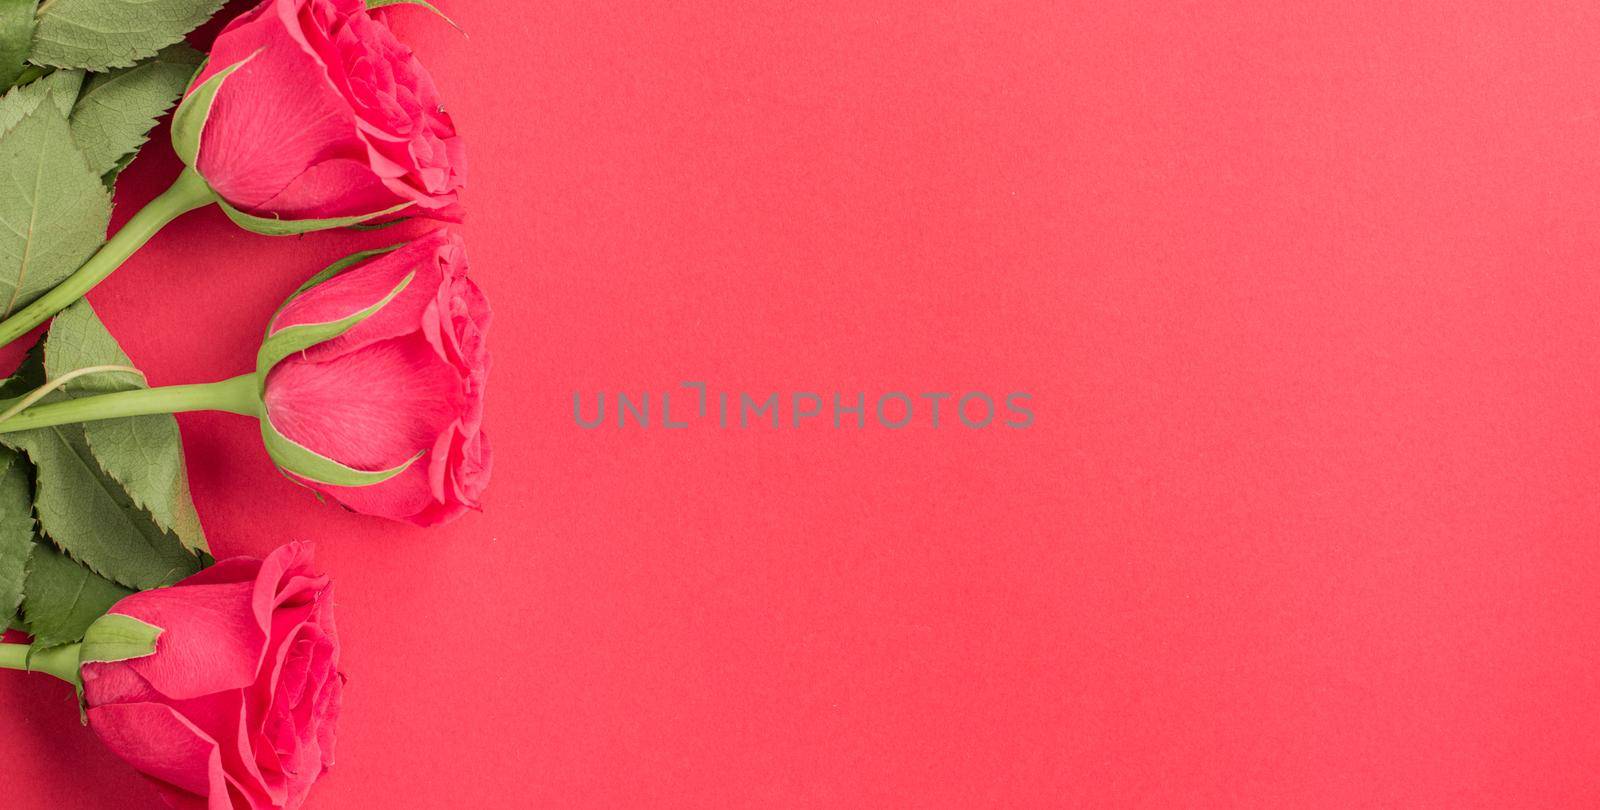 Minimal creative fresh roses on a pastel pink background. Gift concept for Valentine's Day, Wedding or Birthday, banner format. copyspace for text. Flatlay.